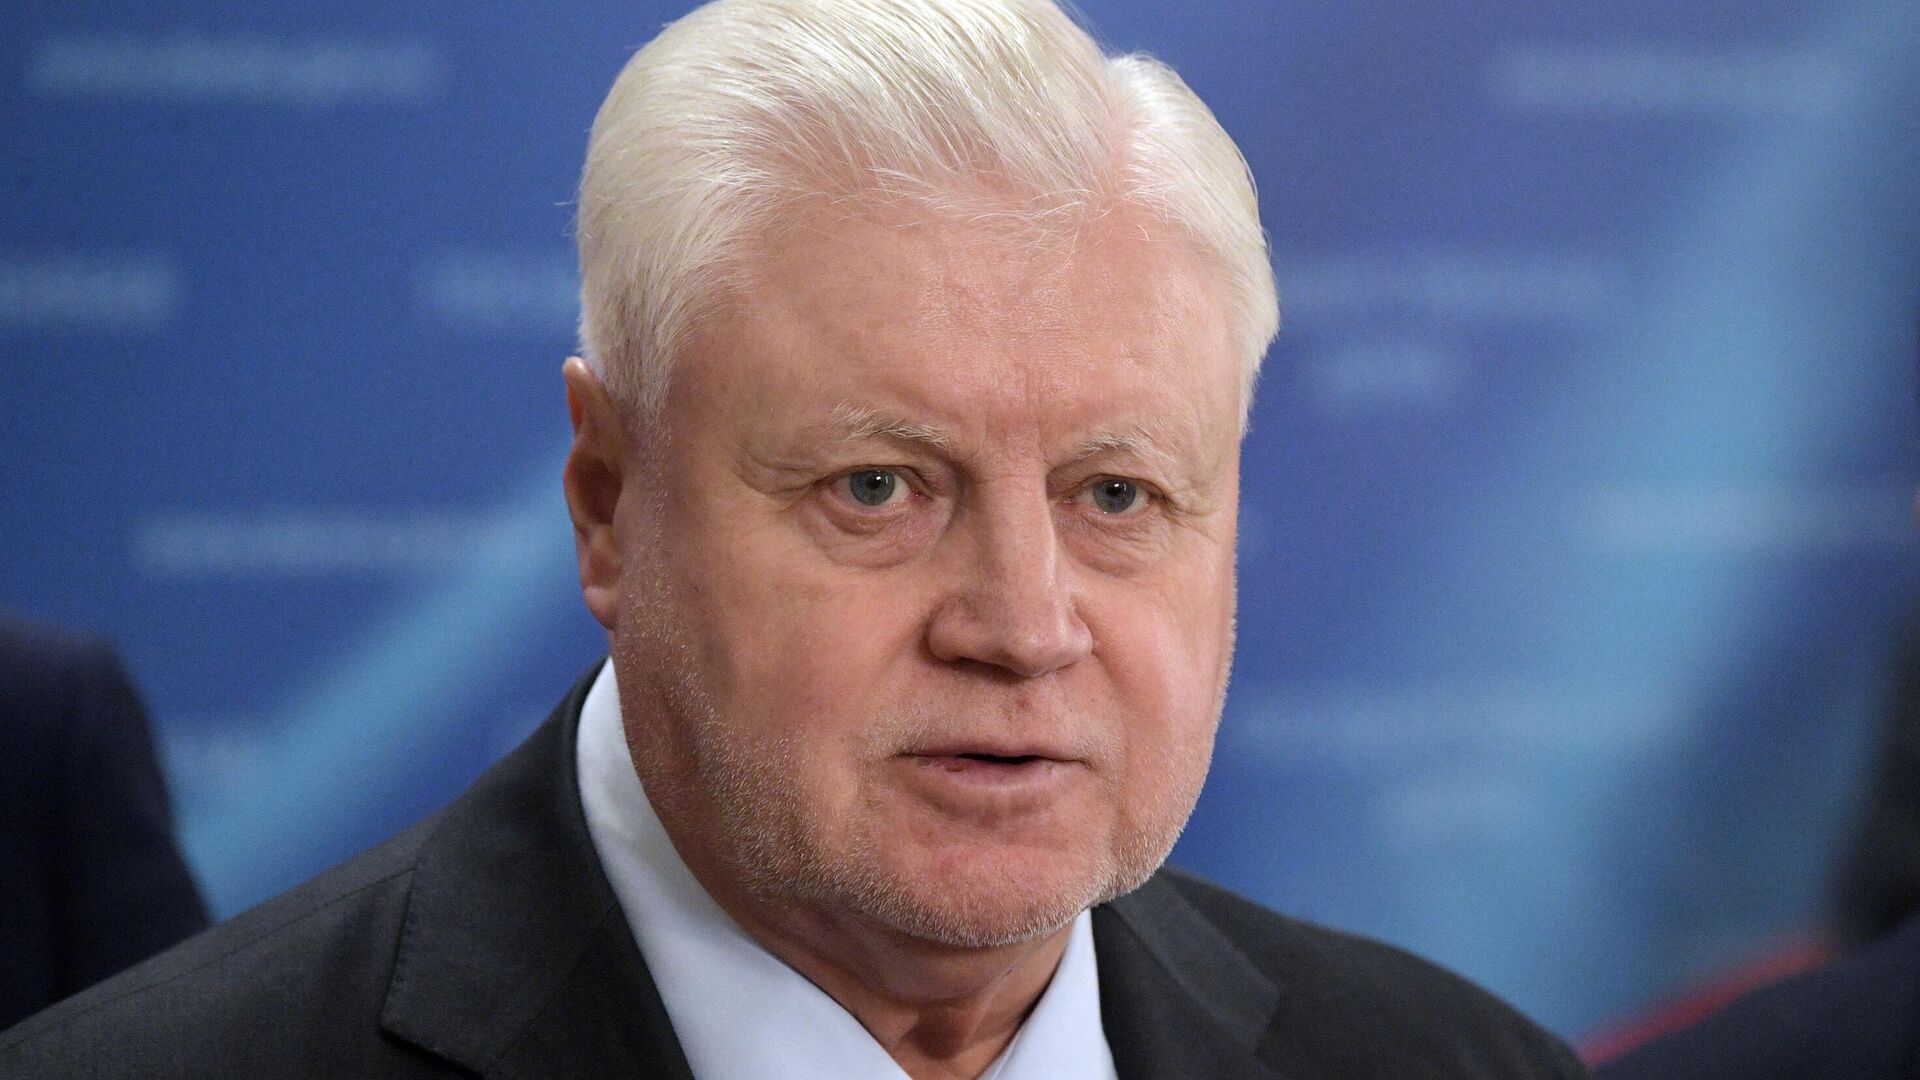 Mironov described the assassination attempt on Putin as the reason for the purge of the Ukrainian authorities.